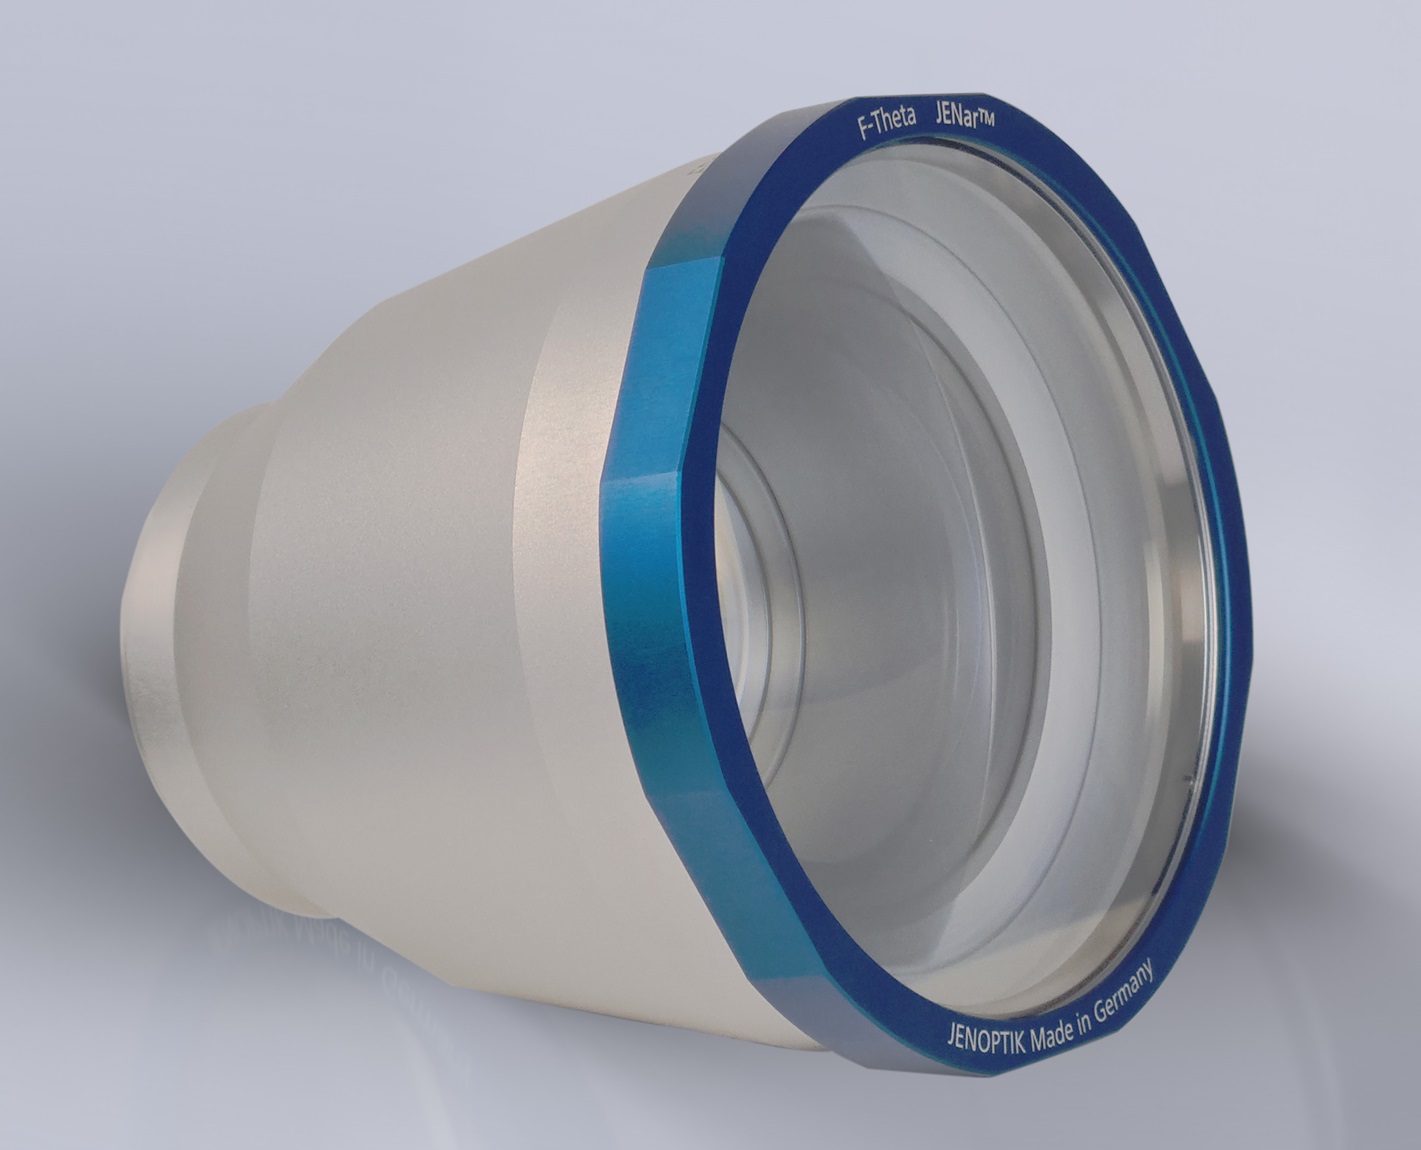 New Jenoptik F-Theta objective lens for high-precision laser structuring of state-of-the-art solar cells:  F-Theta JENar® Silverliner® 340-355-332-S.